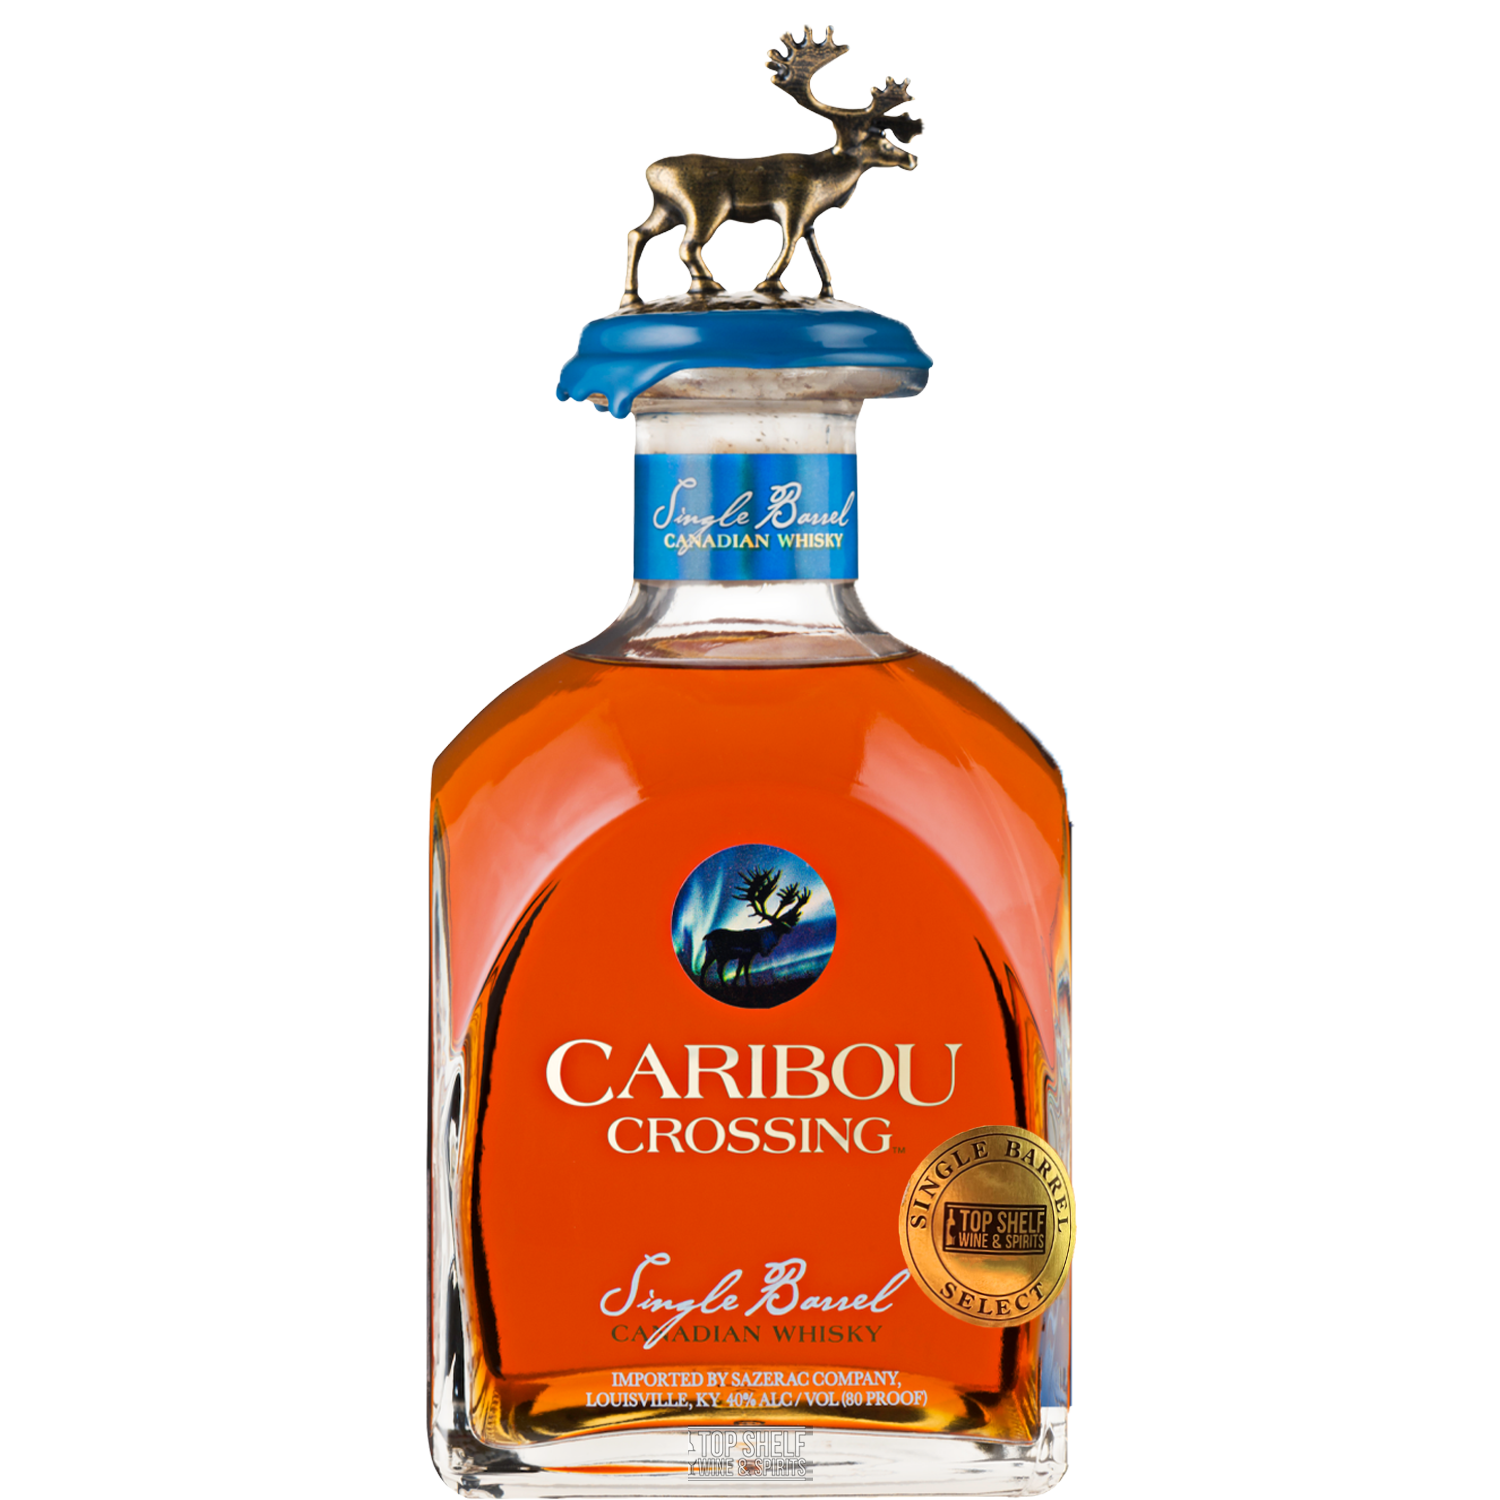 Caribou Crossing Single Barrel Canadian Whisky (Private Selection)